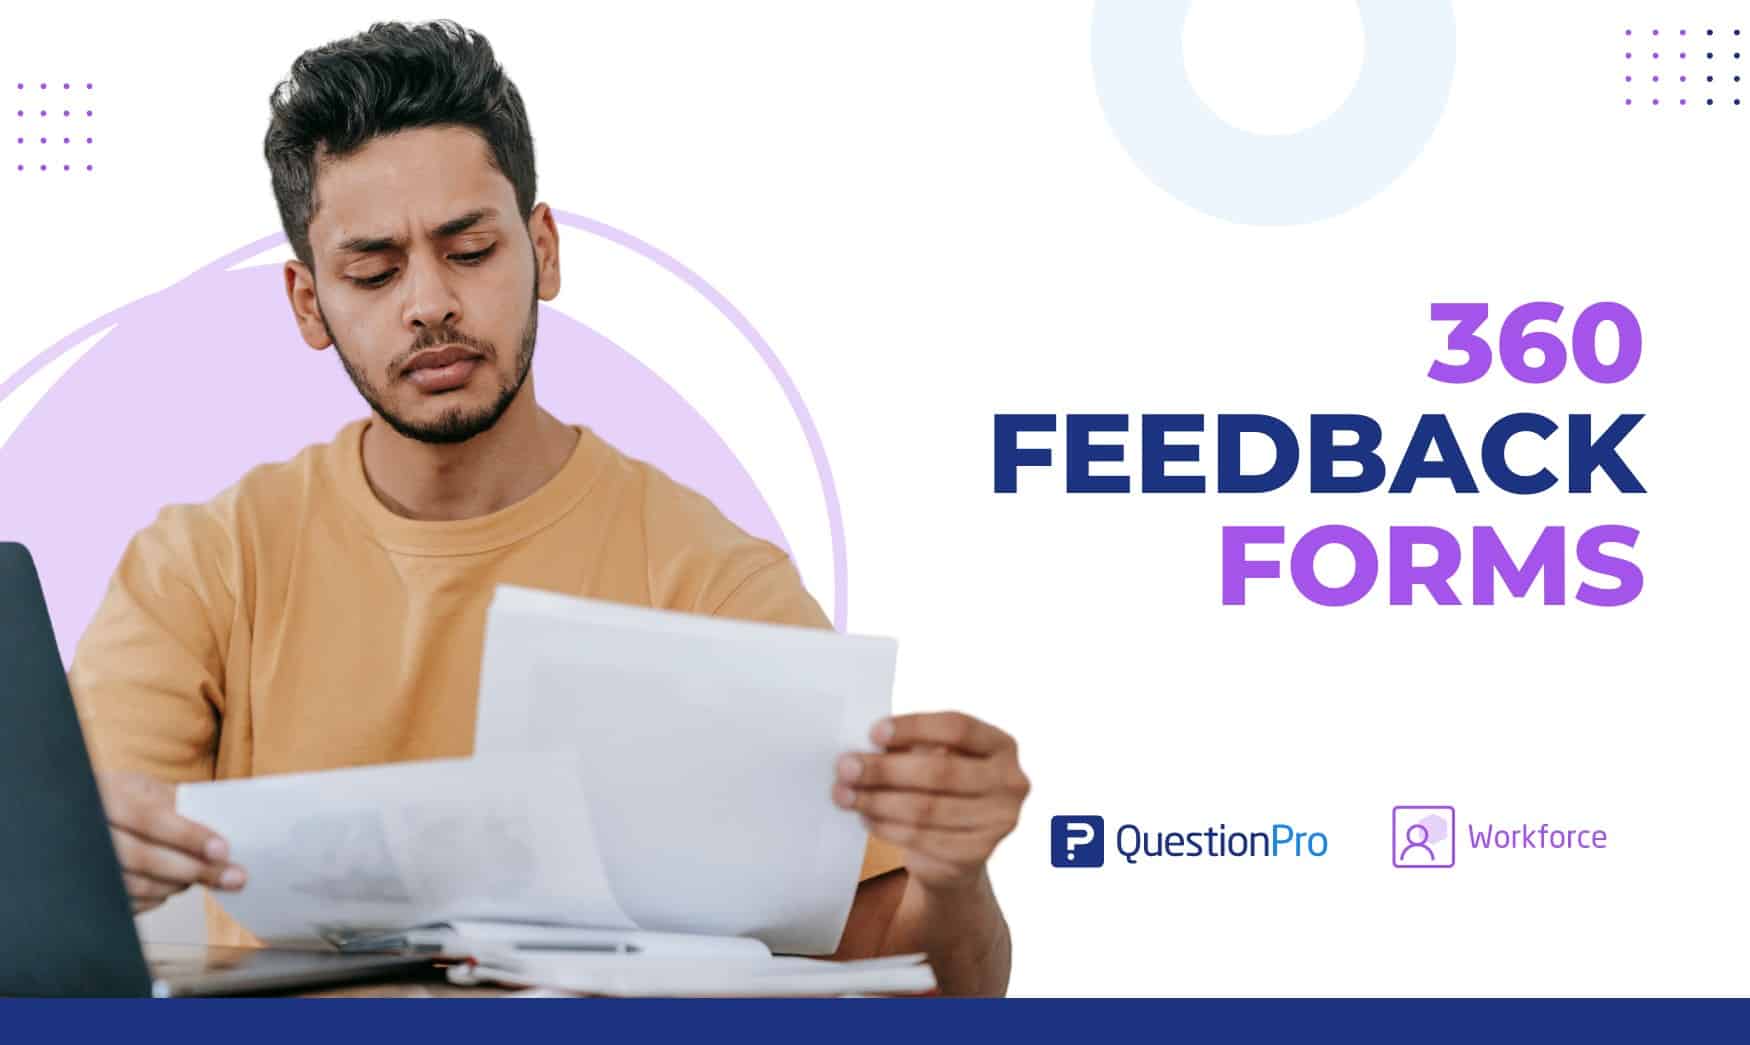 360 feedback forms and how to unlock comprehensive insights for individual development and organizational growth. Learn more.